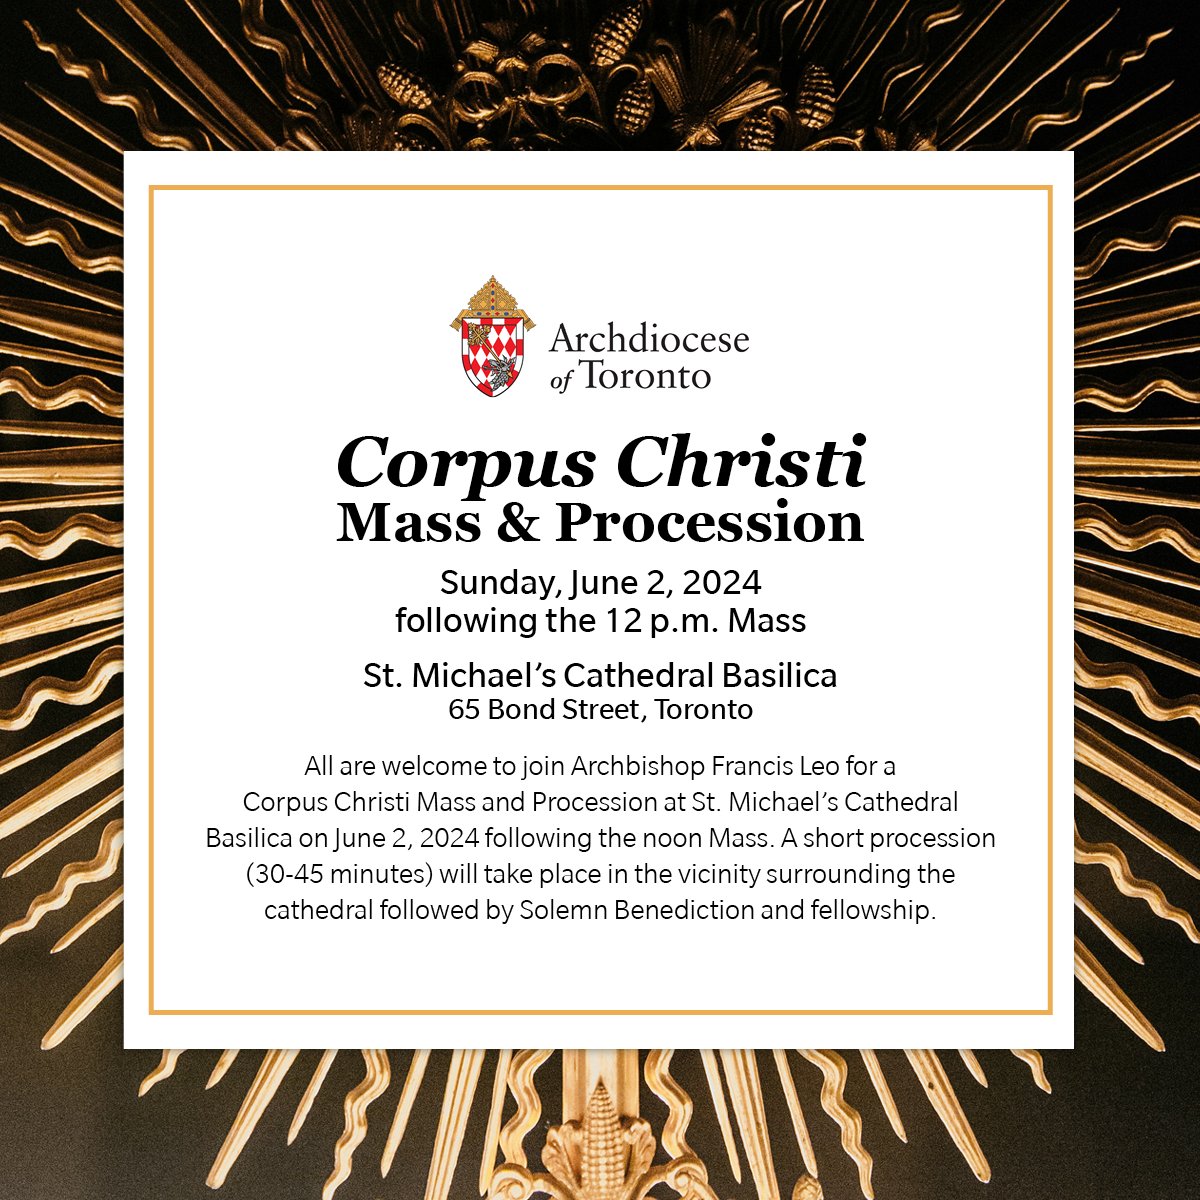 All are welcome to join Archbishop Francis Leo for a Corpus Christi Mass and Procession at St. Michael's Cathedral Basilica on June 2, 2024 following the 12 p.m. Mass. Join us for a short procession followed by Solemn Benediction and fellowship. #catholicTO